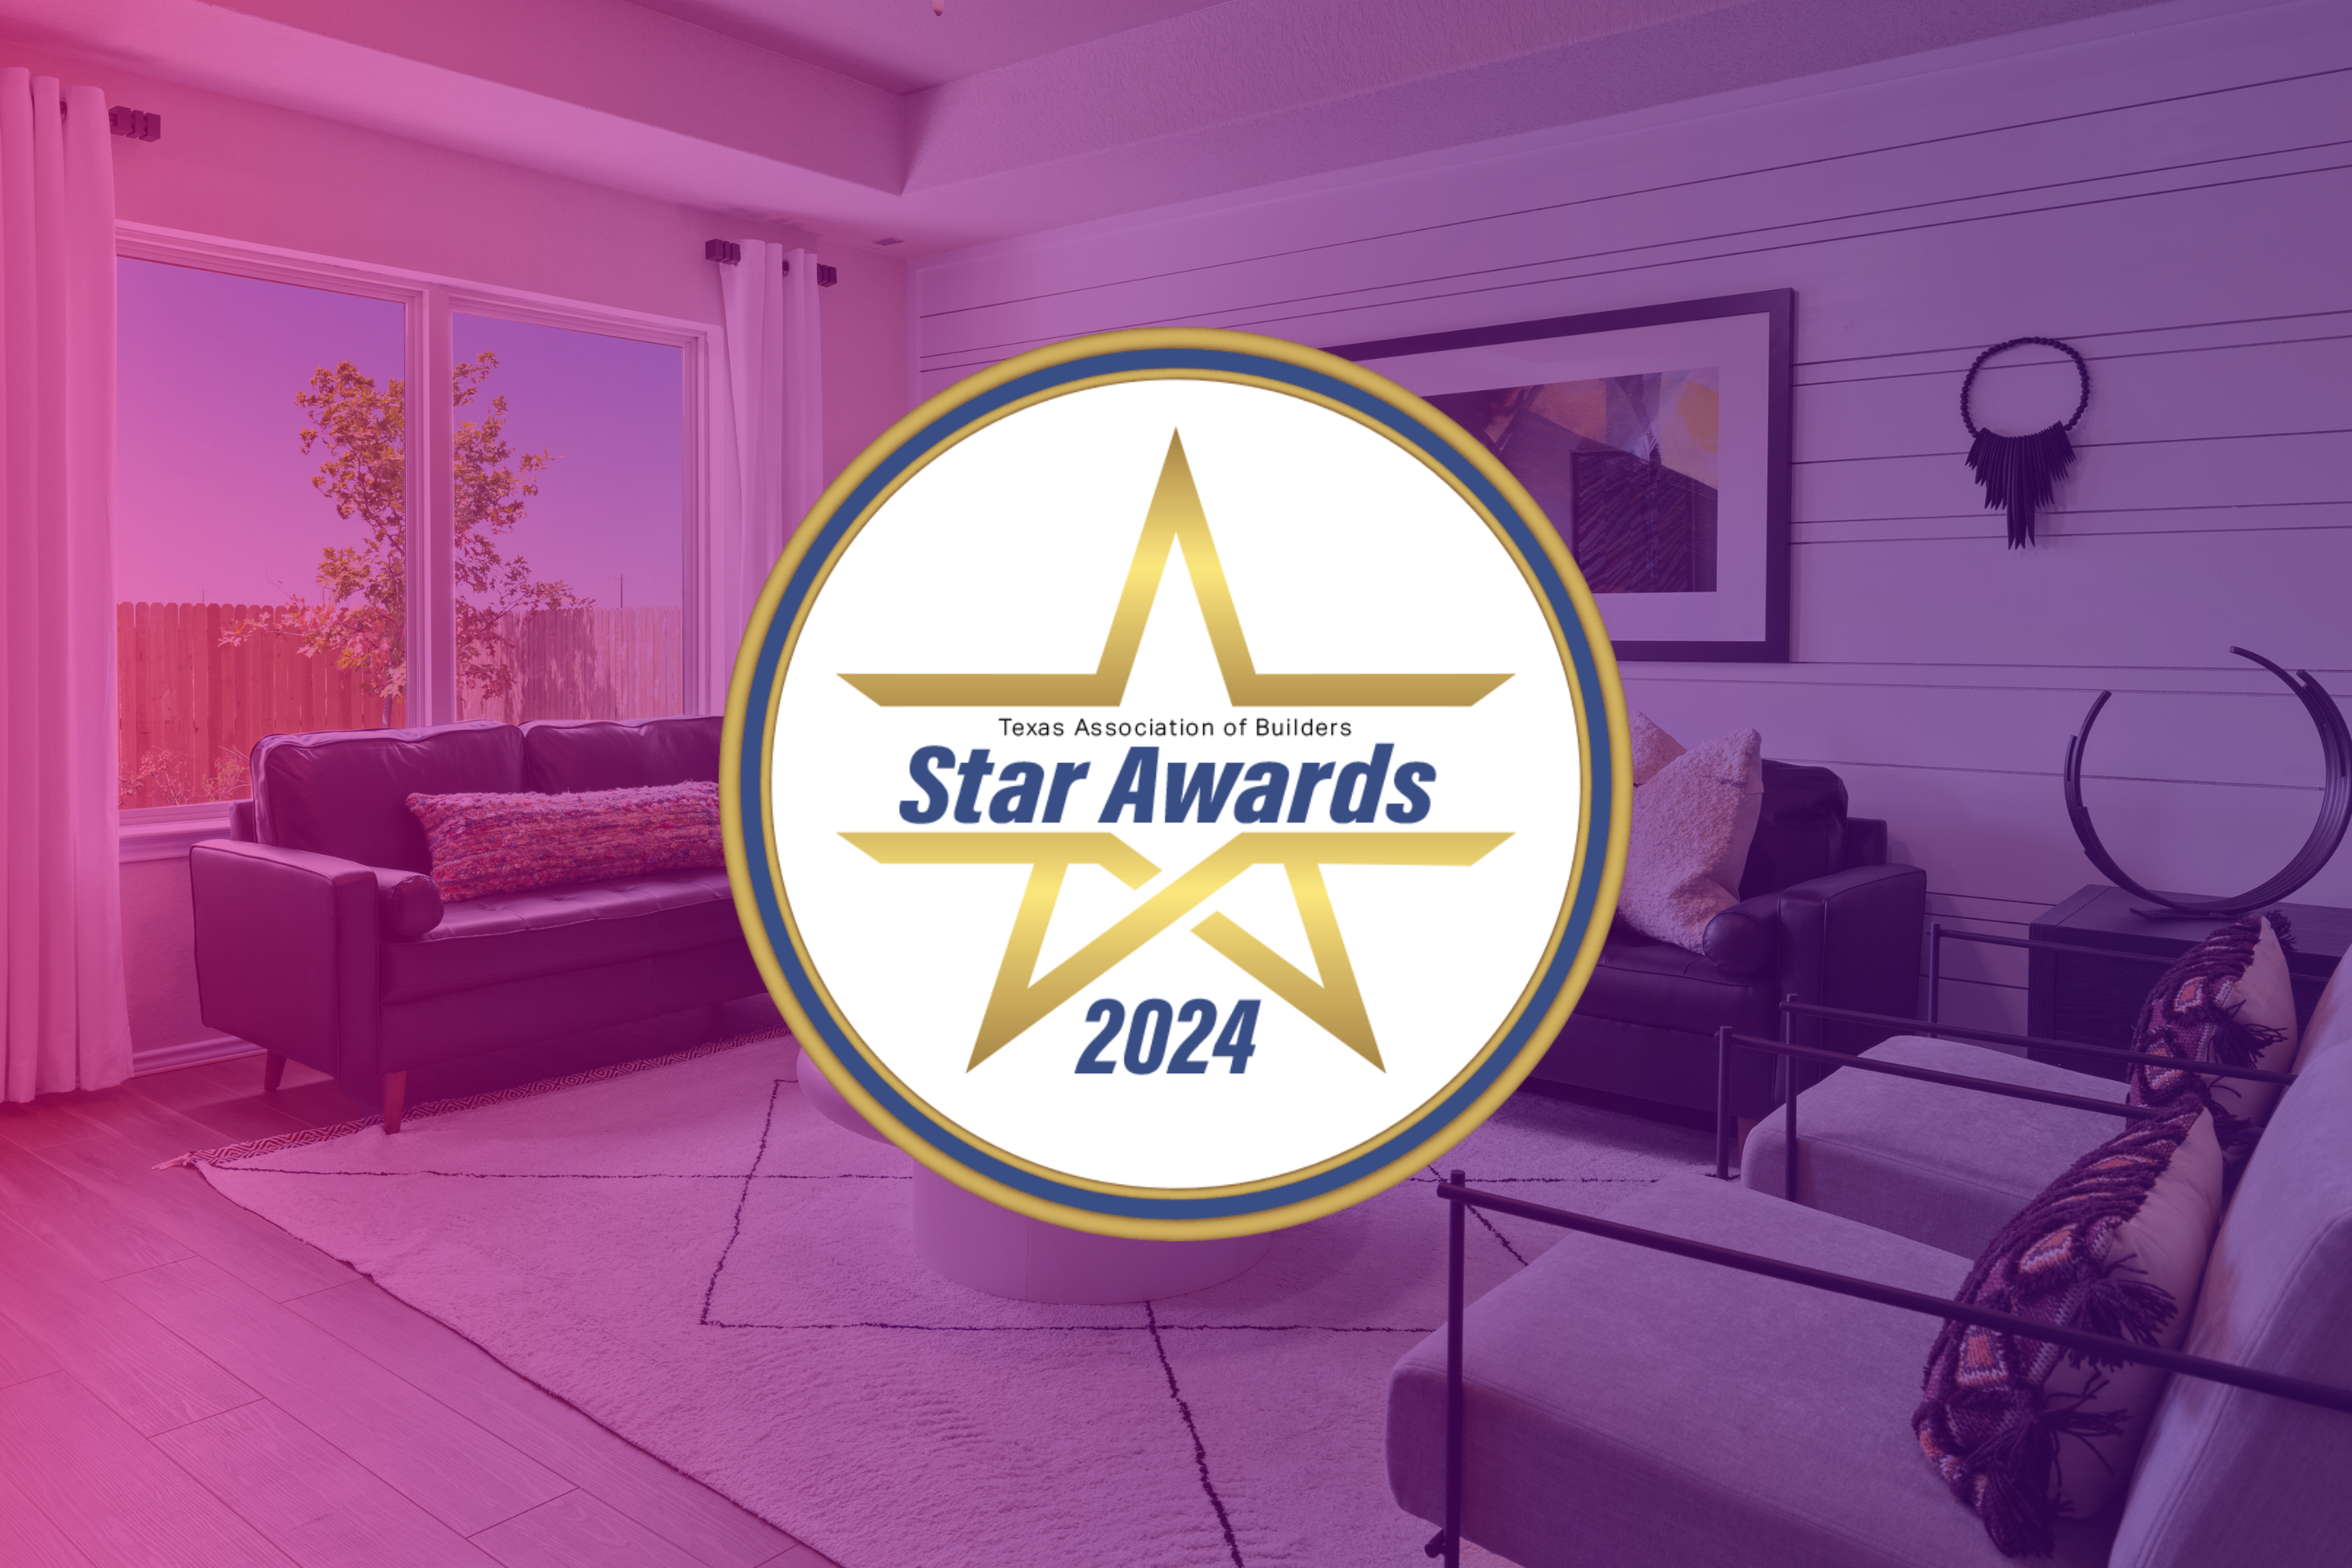 TAB Star Awards Logo imposed over background of model home interior with purple gradient